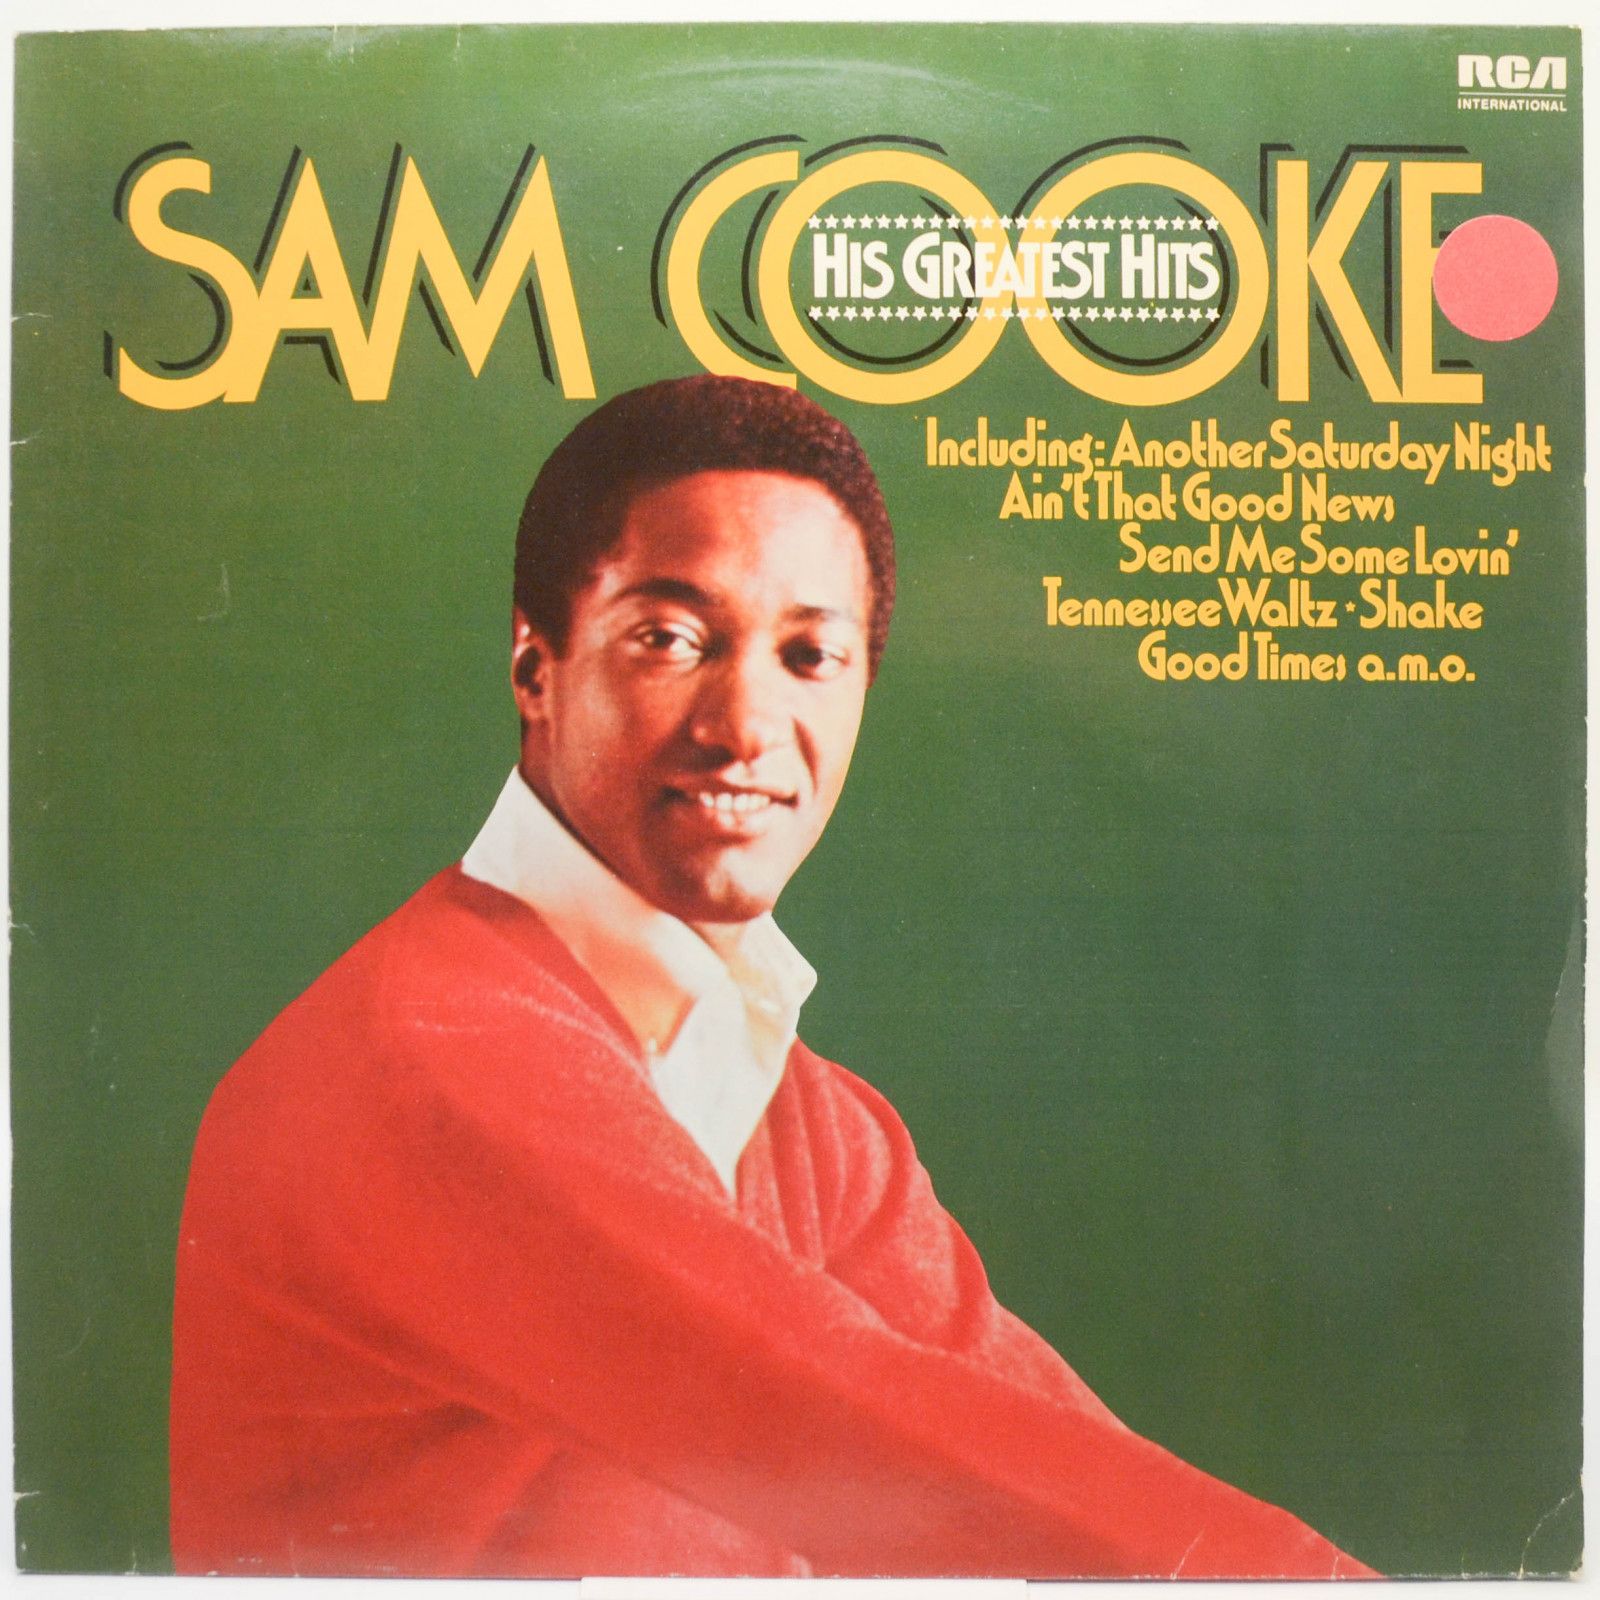 Sam Cooke — His Greatest Hits, 1985